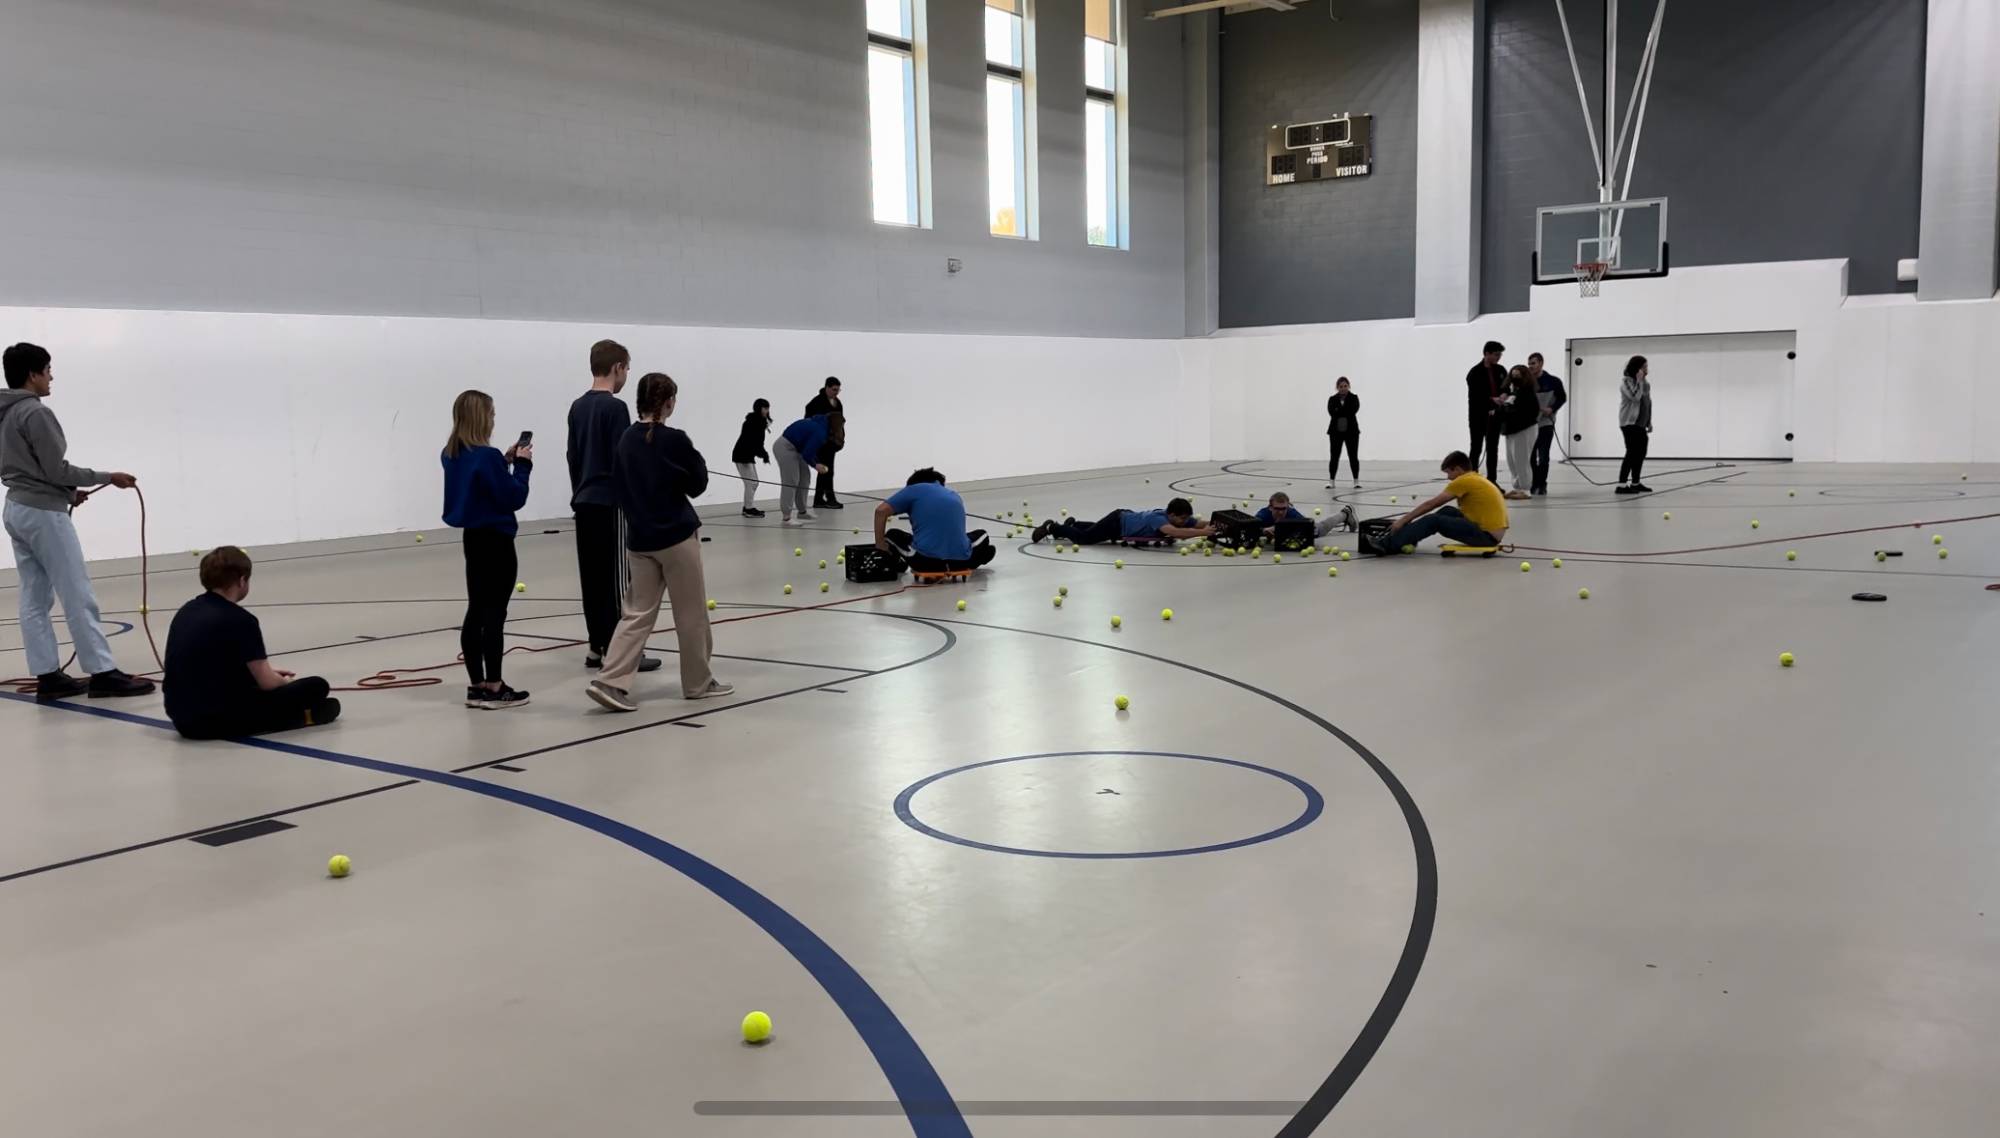 Links U participants playing a game in a gymnasium with tennis balls and floor scooters.